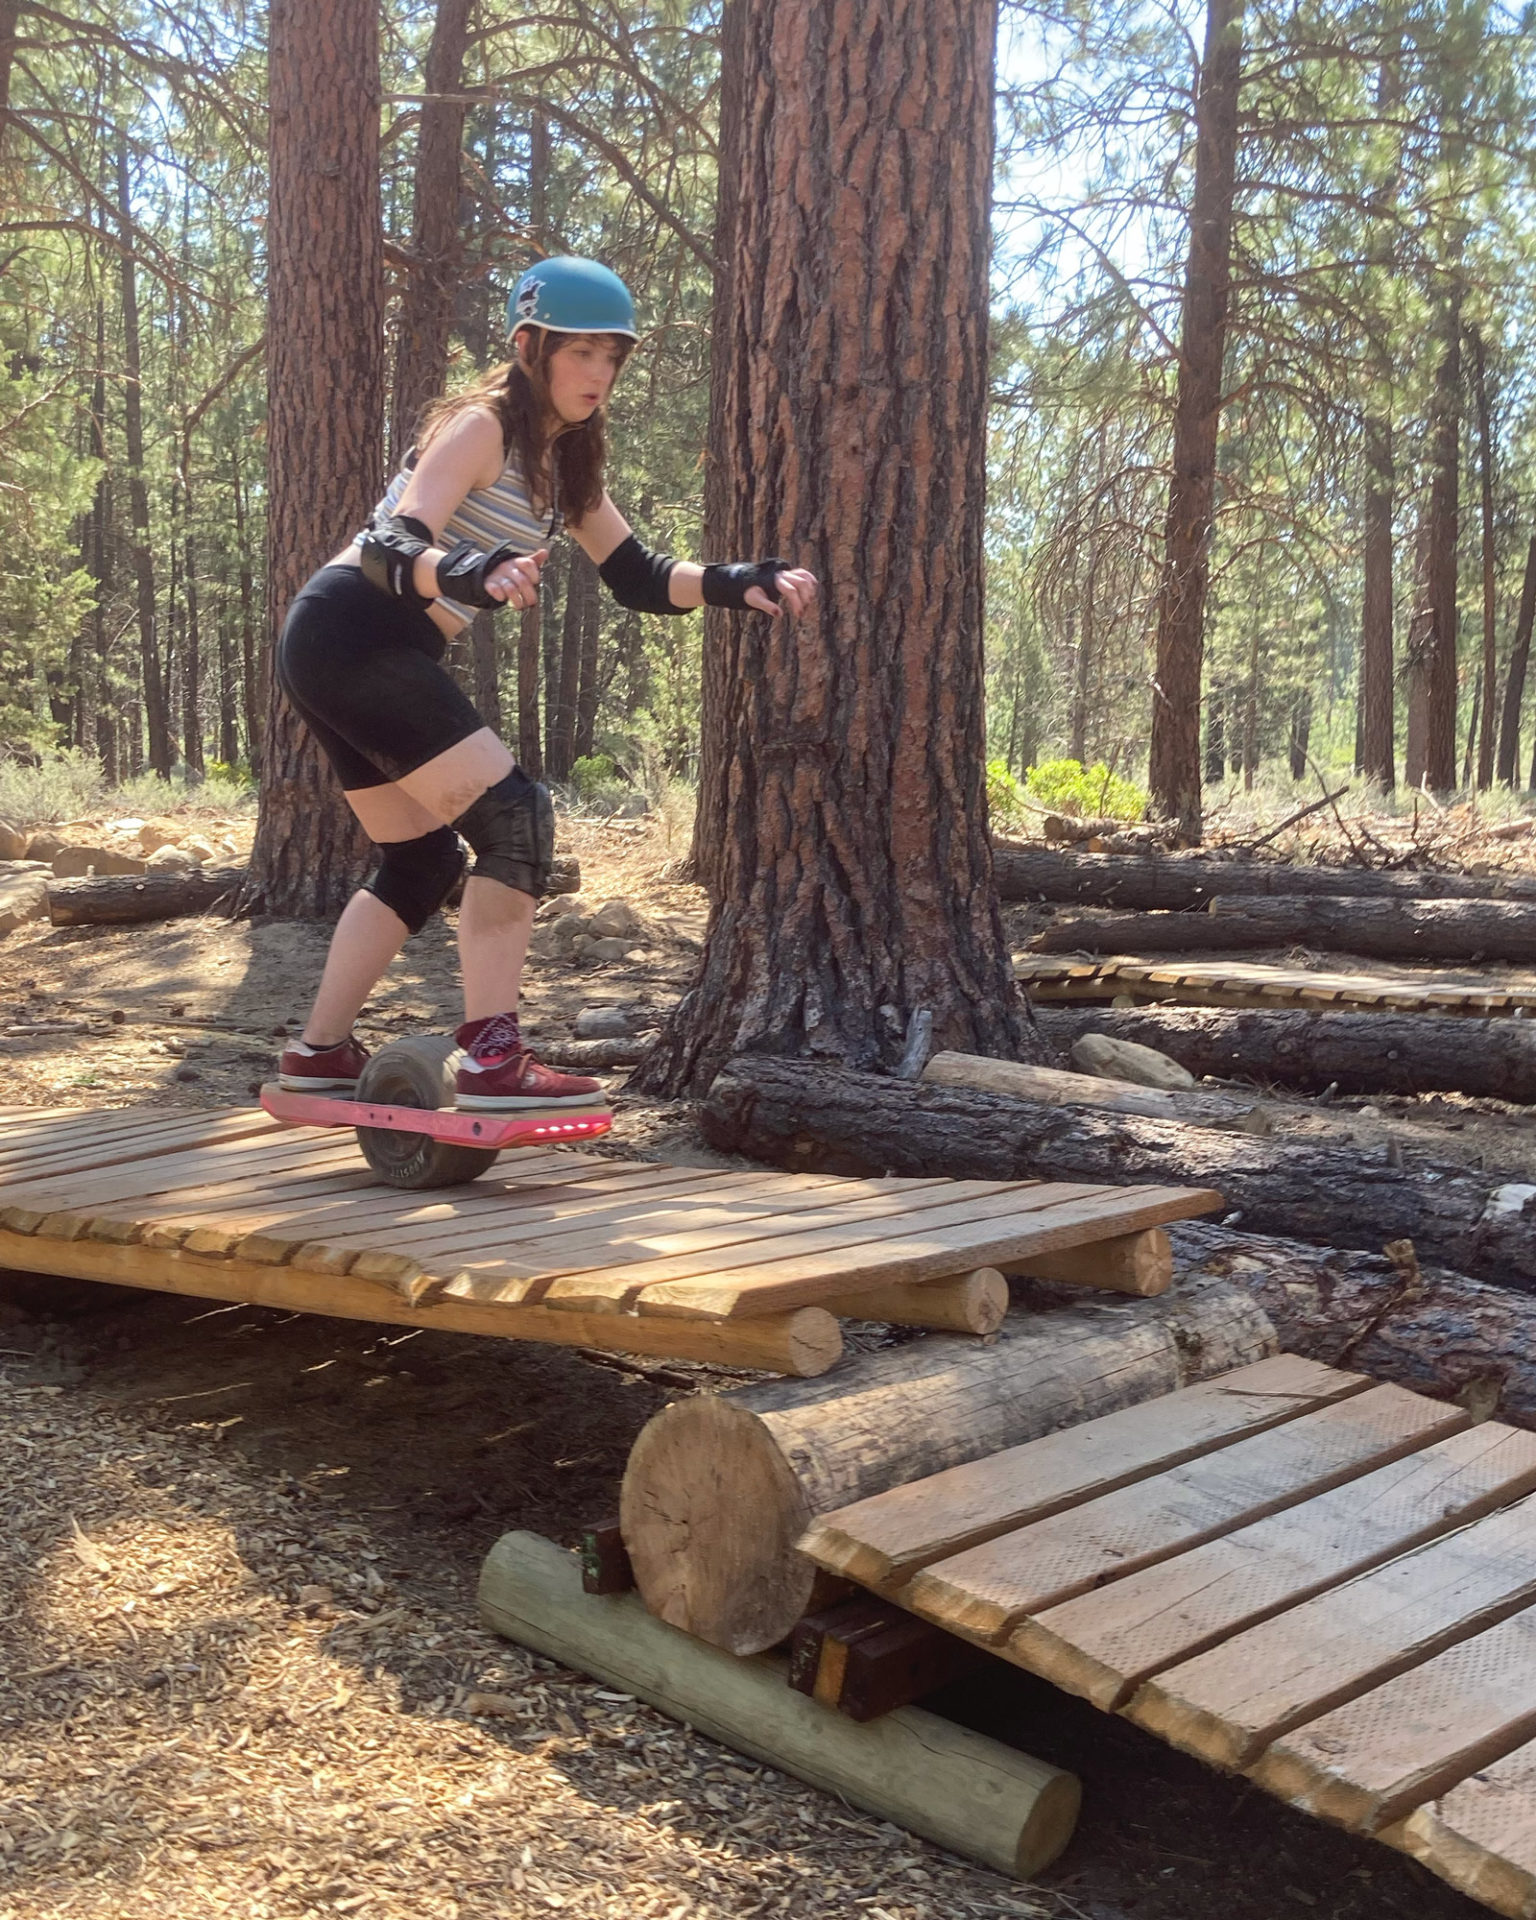 Alice Chamberlain tackles the boardwalk drop at the Drift Sisters 2021 retreat